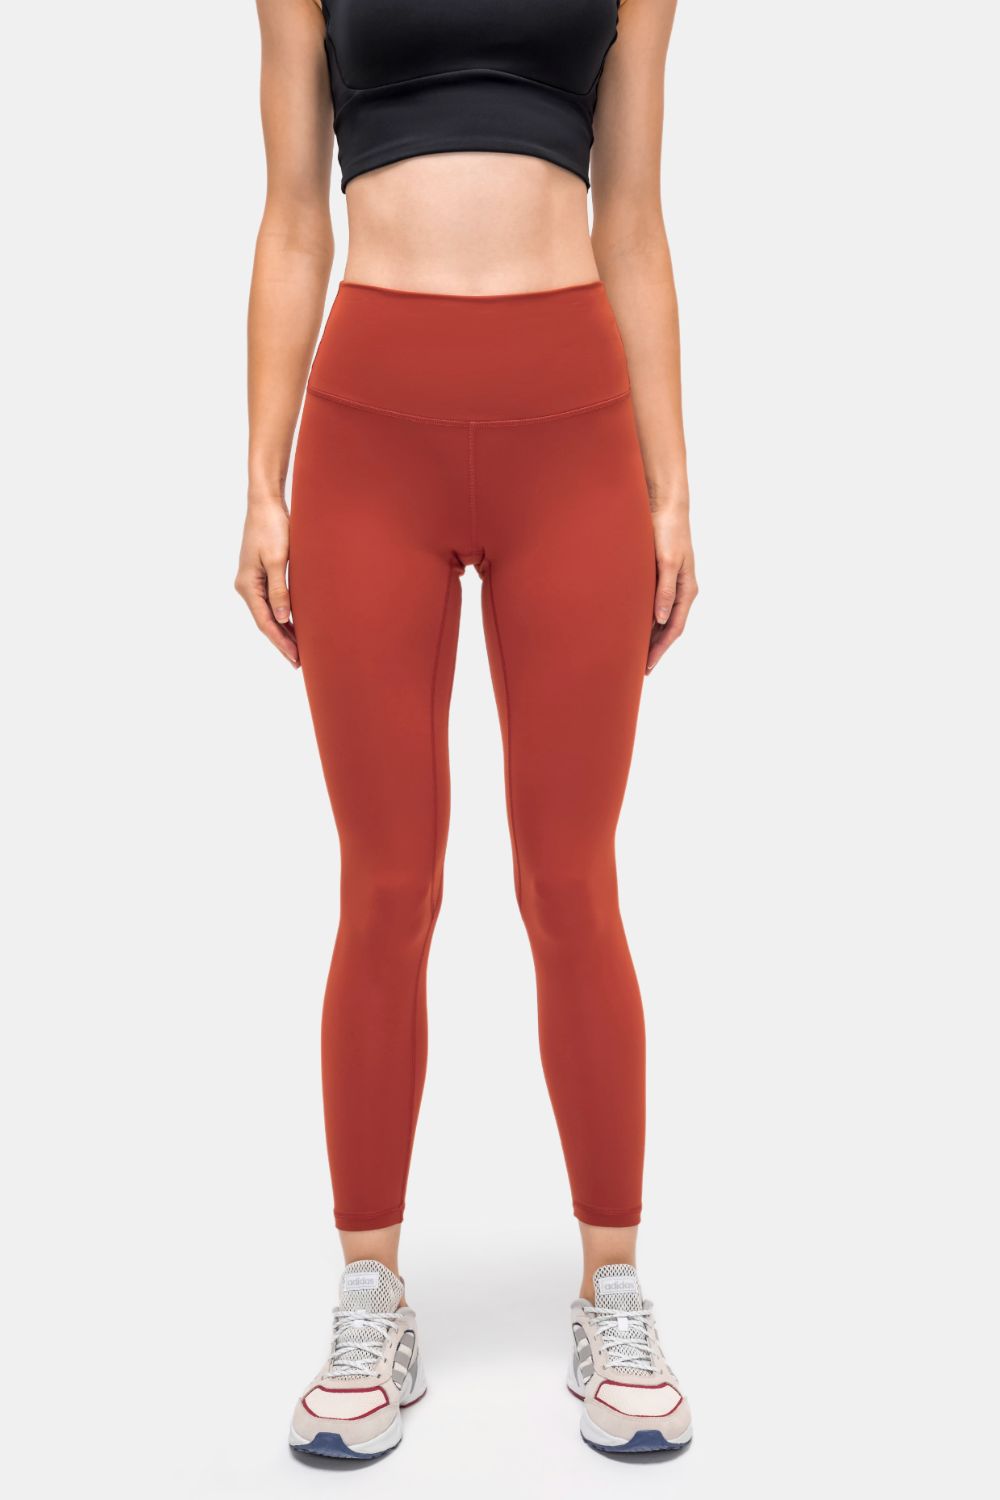 Invisible Pocket Sports Leggings - A Better You